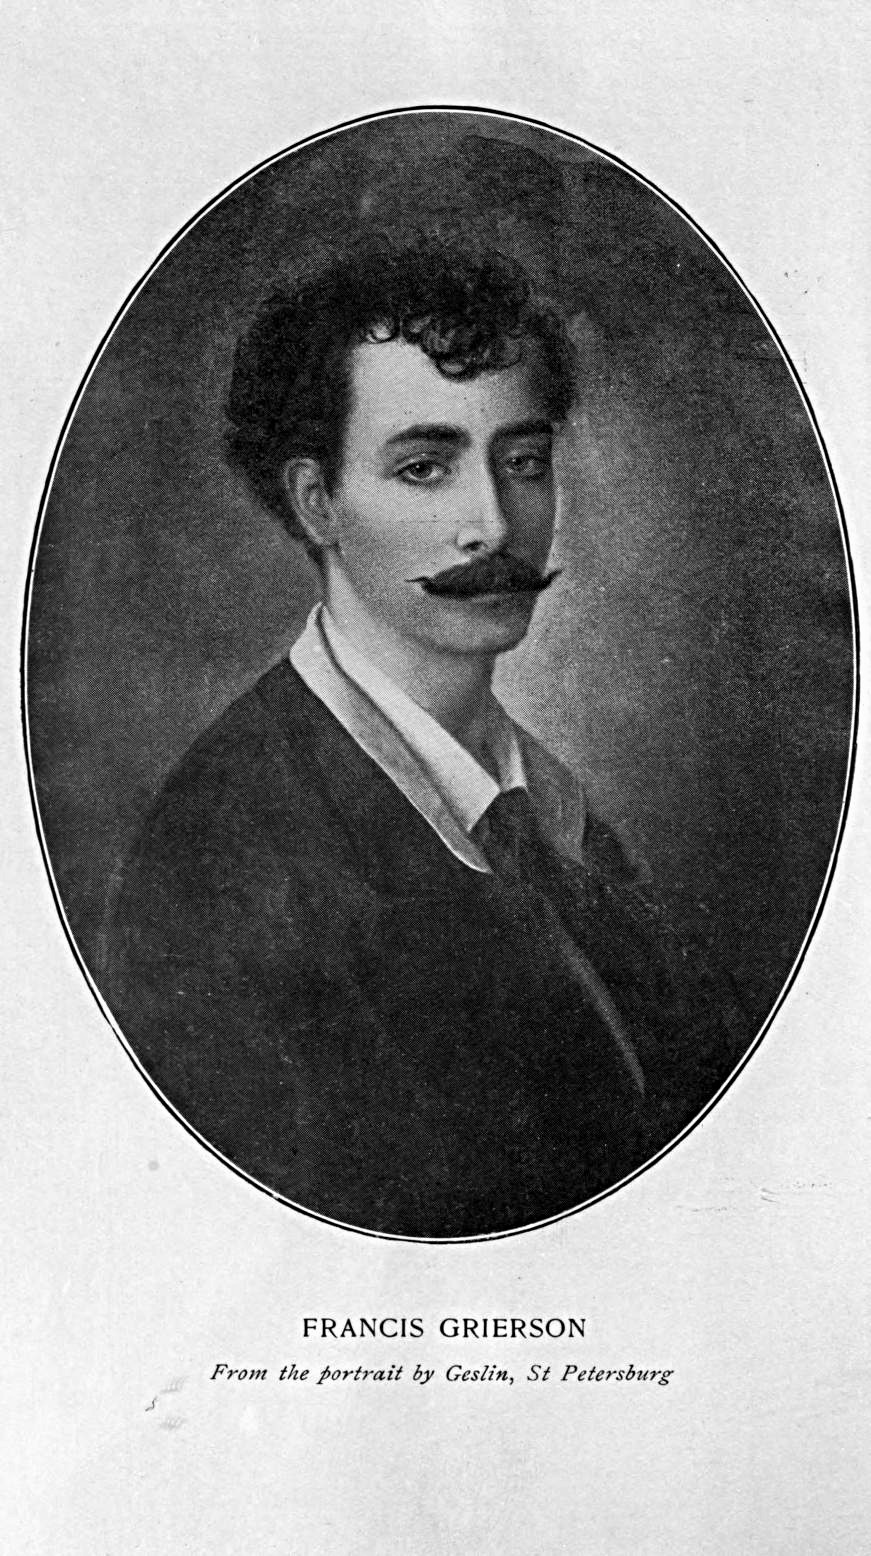 Francis Grierson, from the portrait by Geslin, St. Petersburg - frontis, "The Humour of the Underman and Other Essays" (1911).